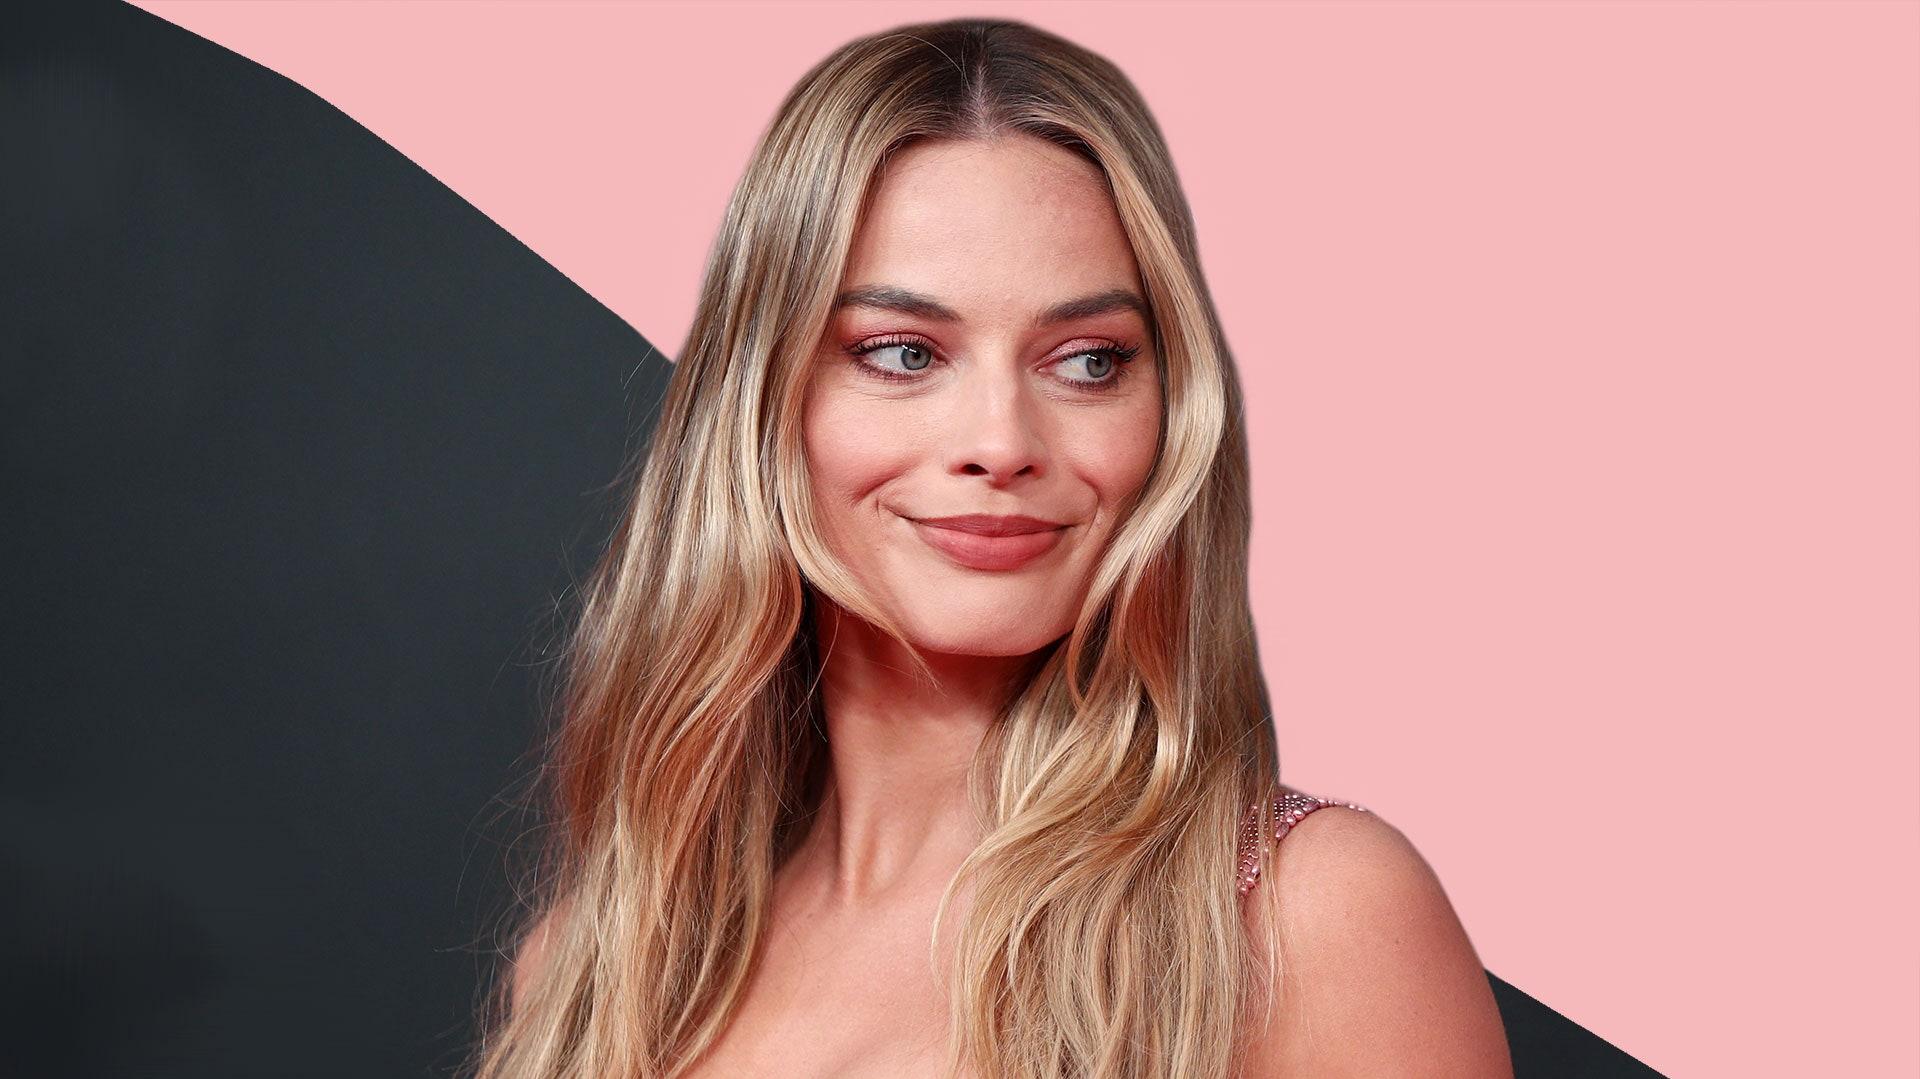 Margot Robbie Trades in a Pink Suit for a Ballerina Dress to